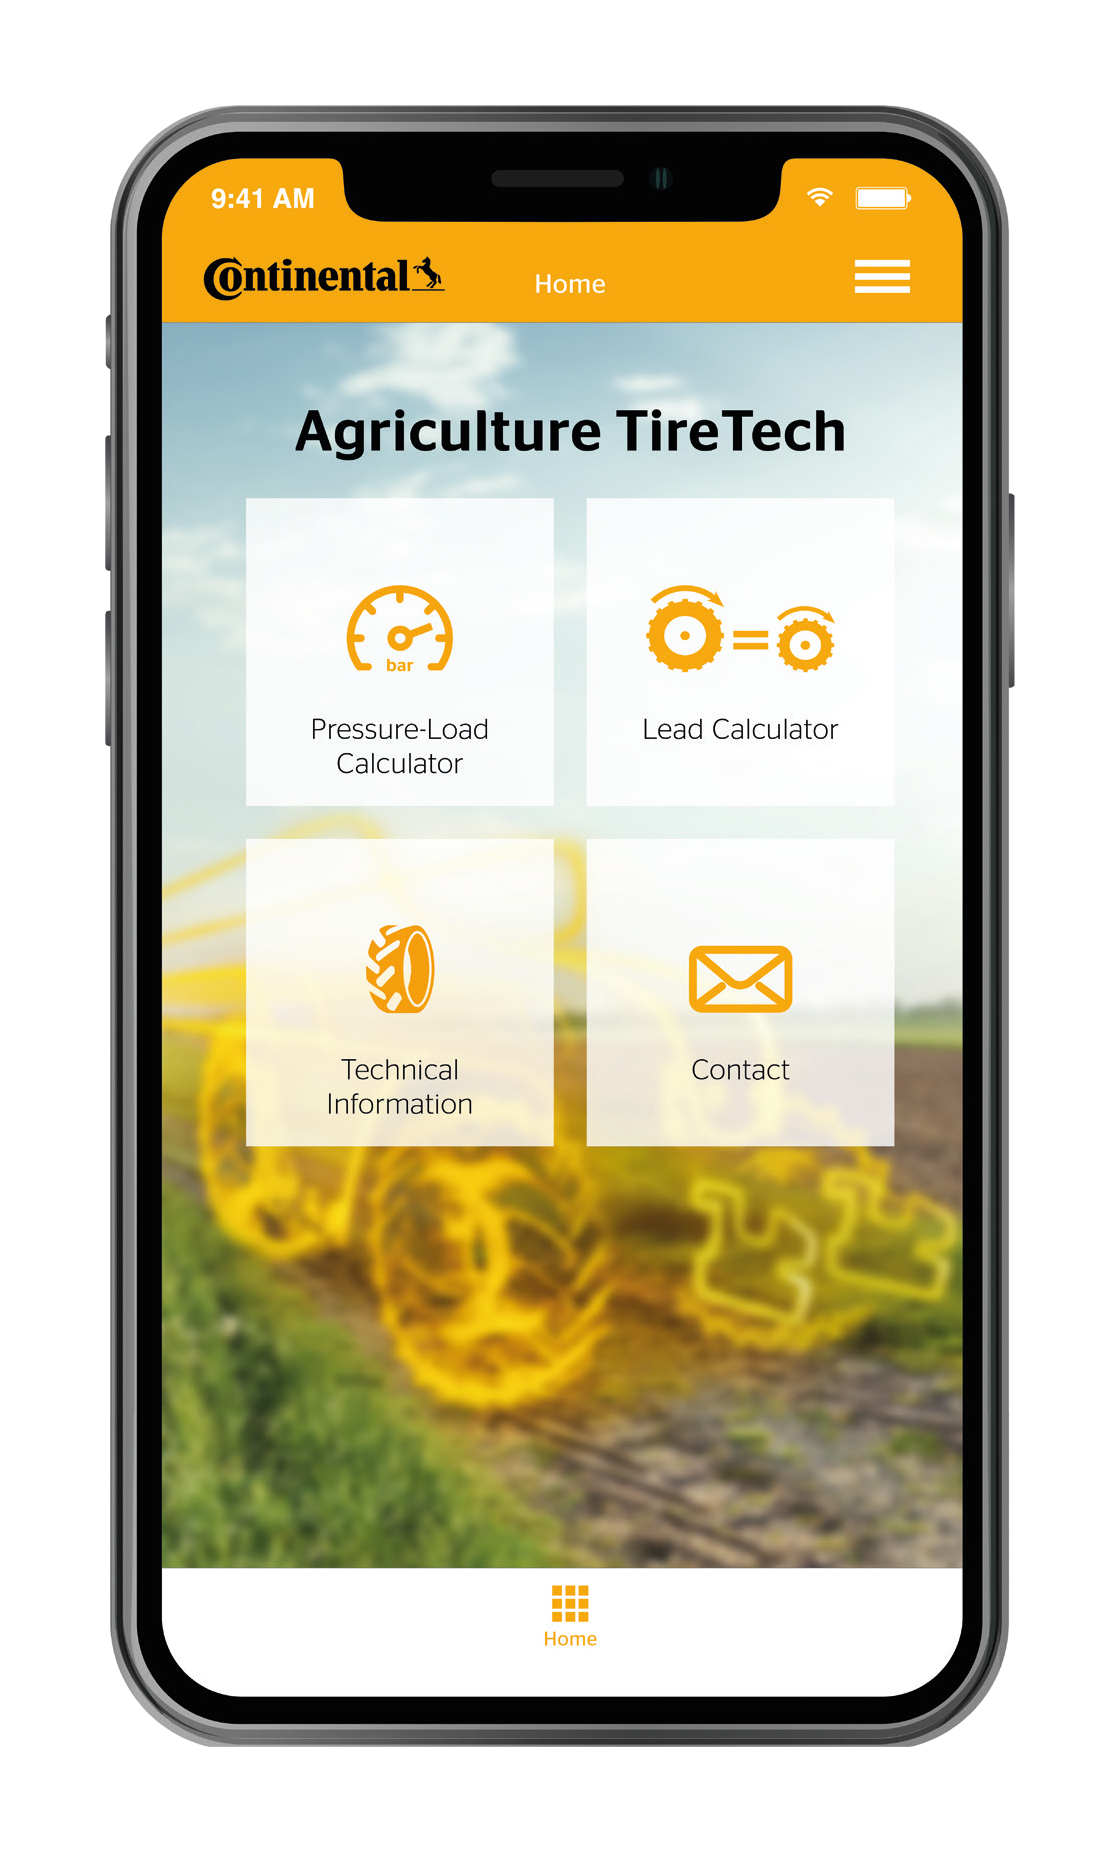 Continental Agriculture TireTech App